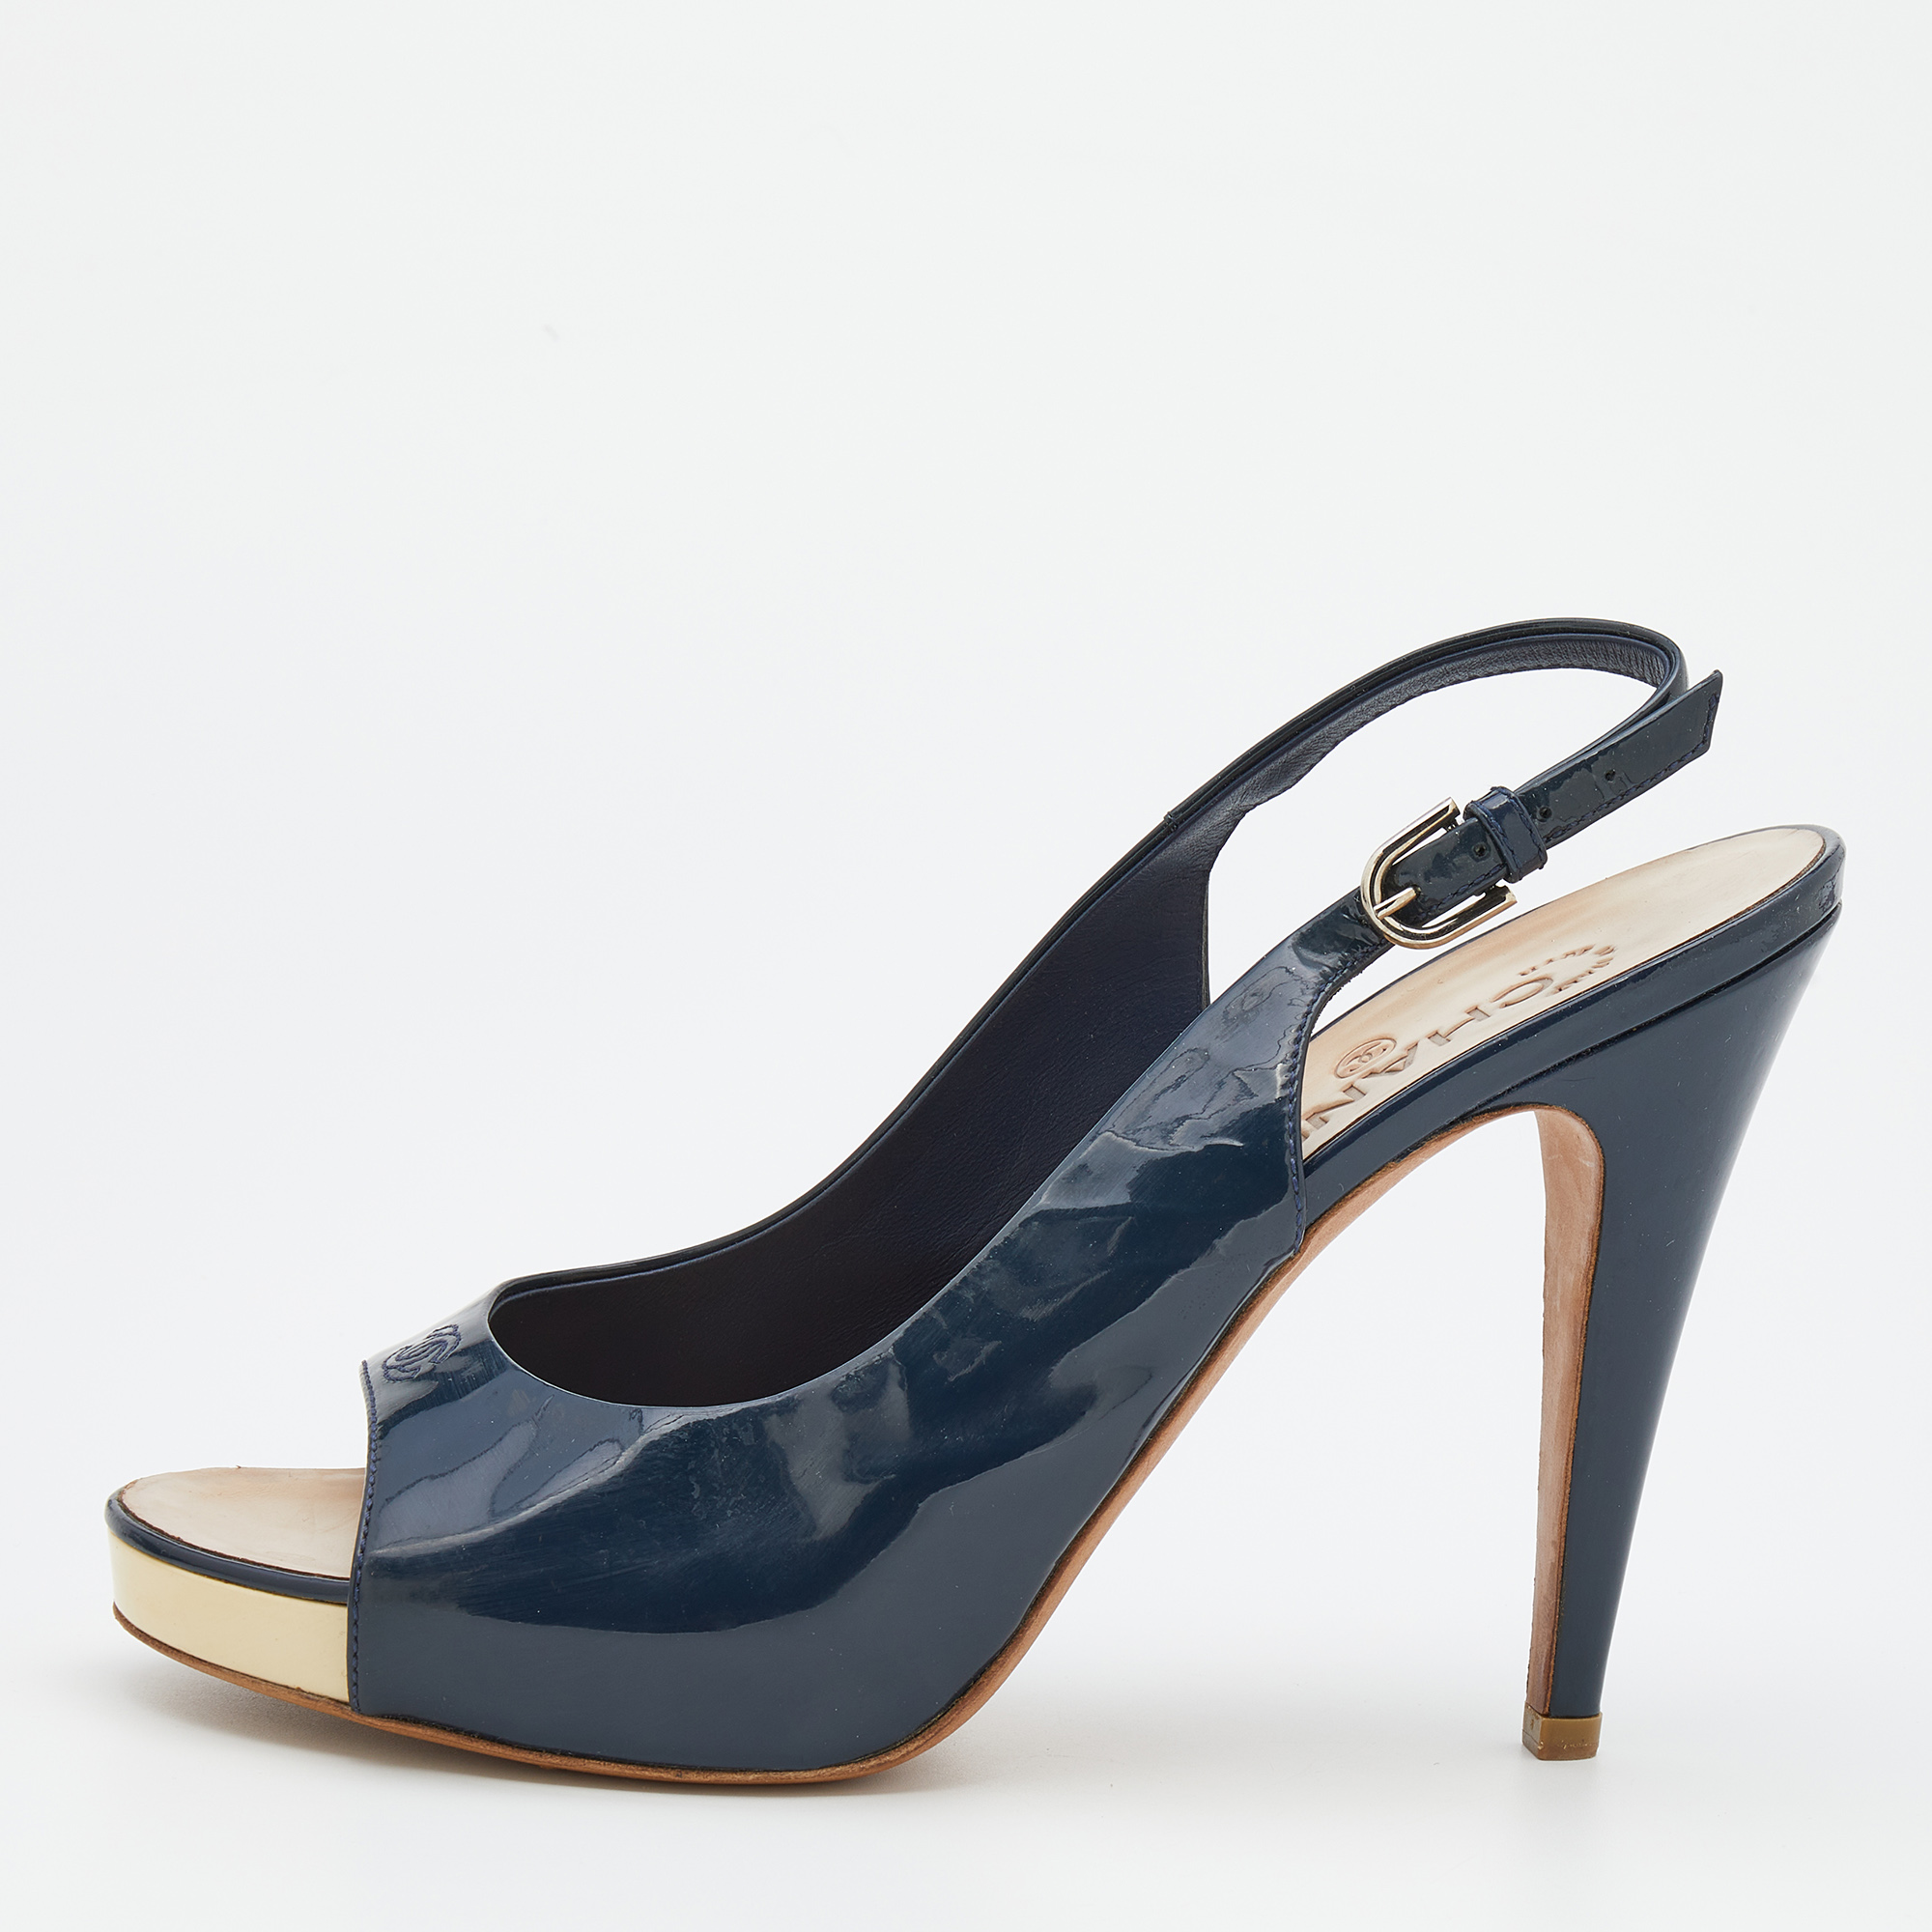 Pre-owned Chanel Navy Blue Patent Leather Cc Open Toe Platform